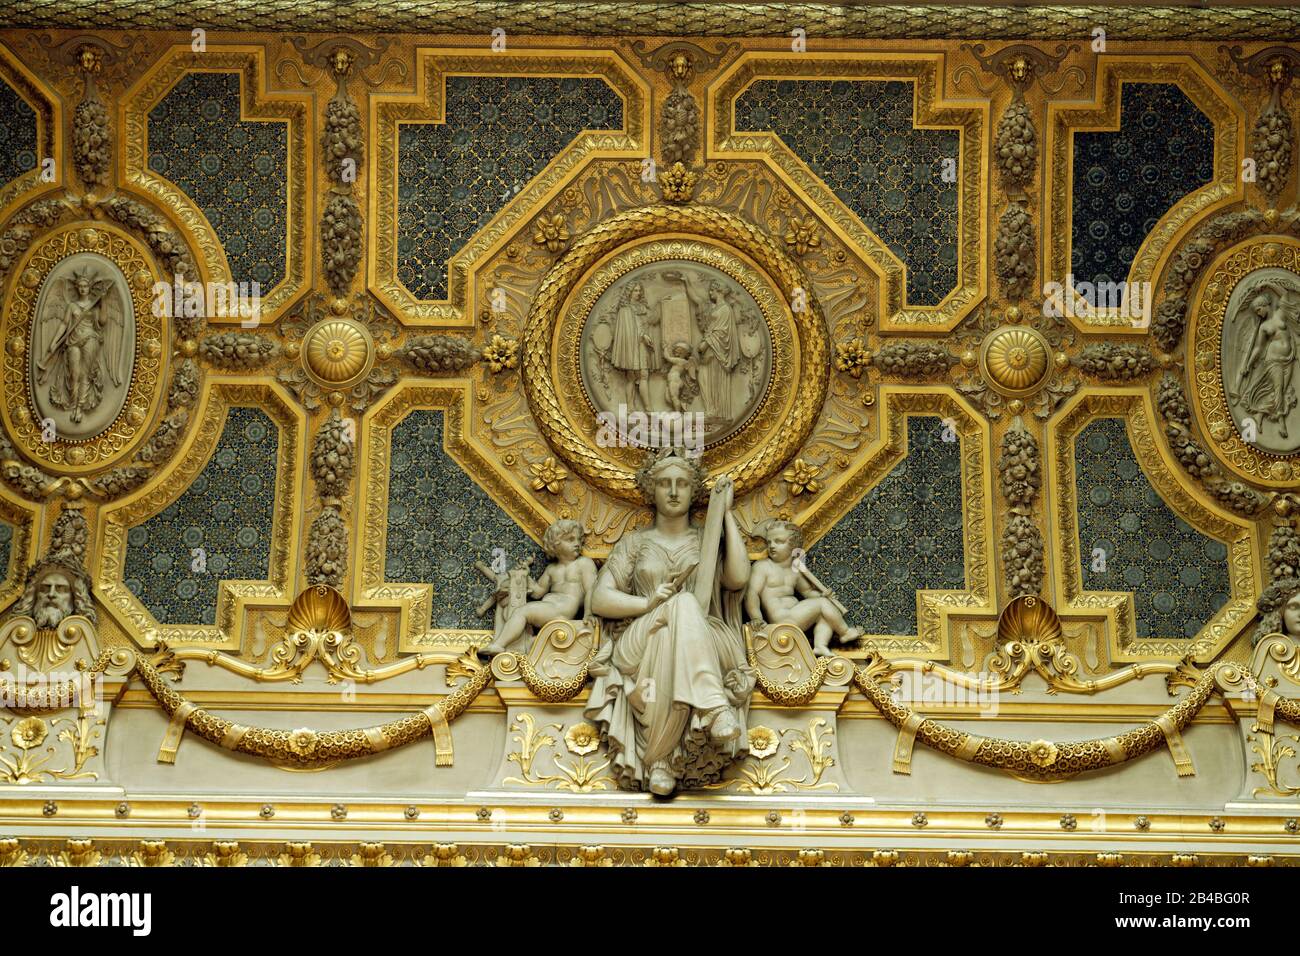 France, Paris, UNESCO World Heritage Site, Louvre museum, Salon Carre (Squared Room), built in 1661 by architect Louis Le Vau, Ceiling completed in 1851 and devoted to the arts Stock Photo